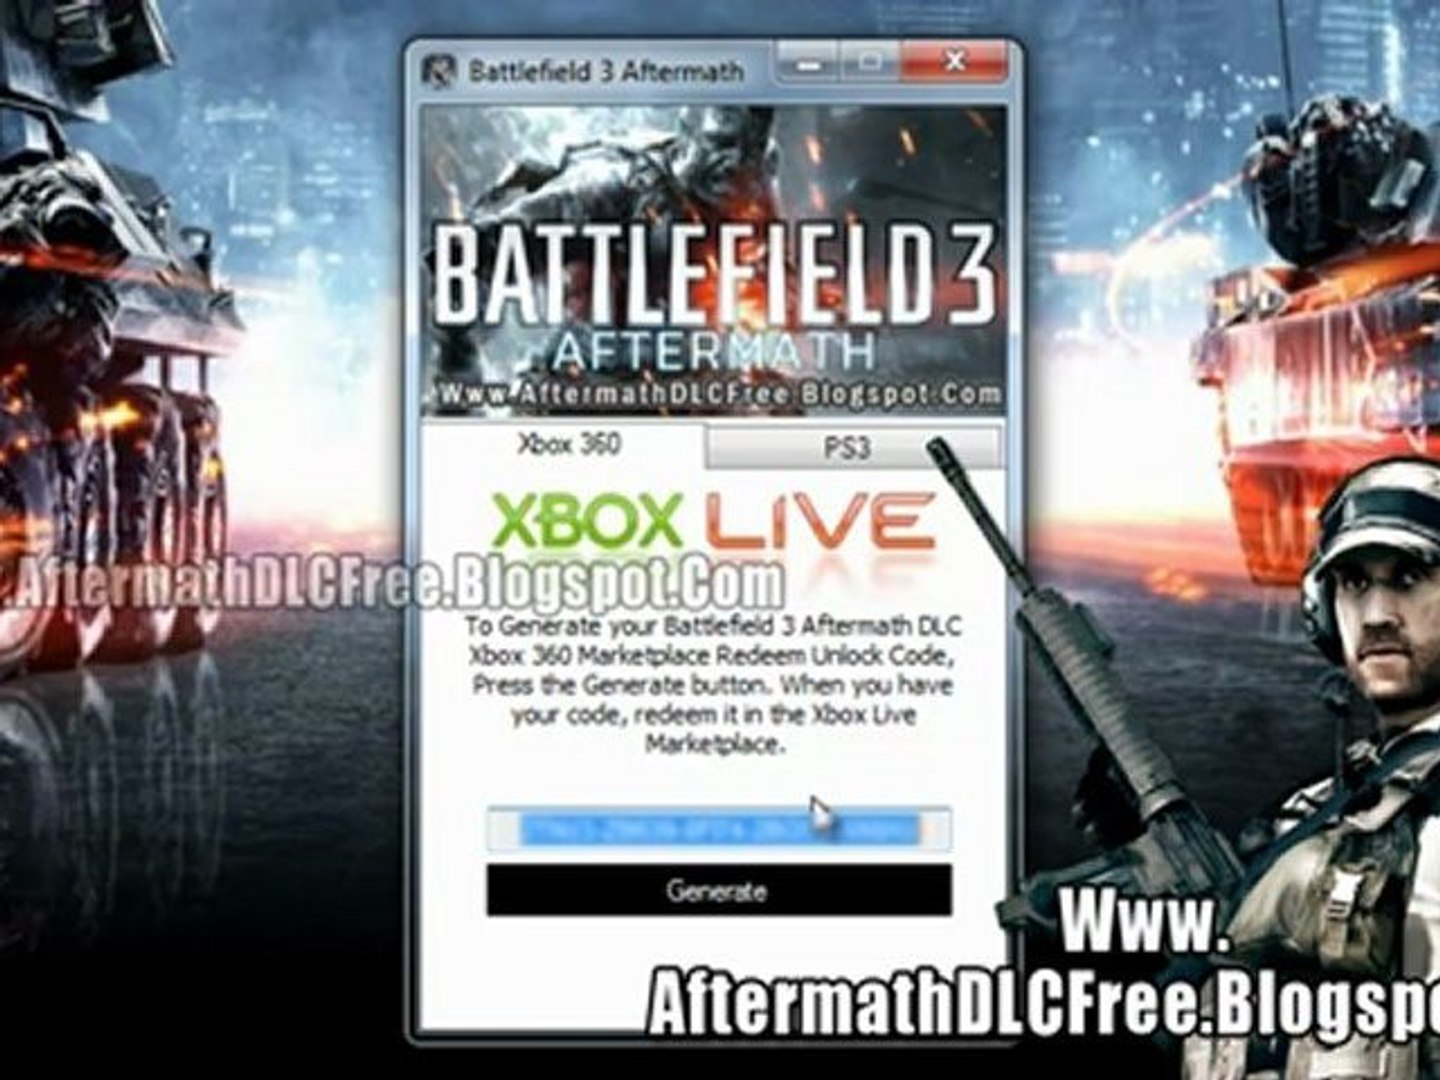 Battlefield 3 Aftermath DLC Codes - Free!! - video Dailymotion